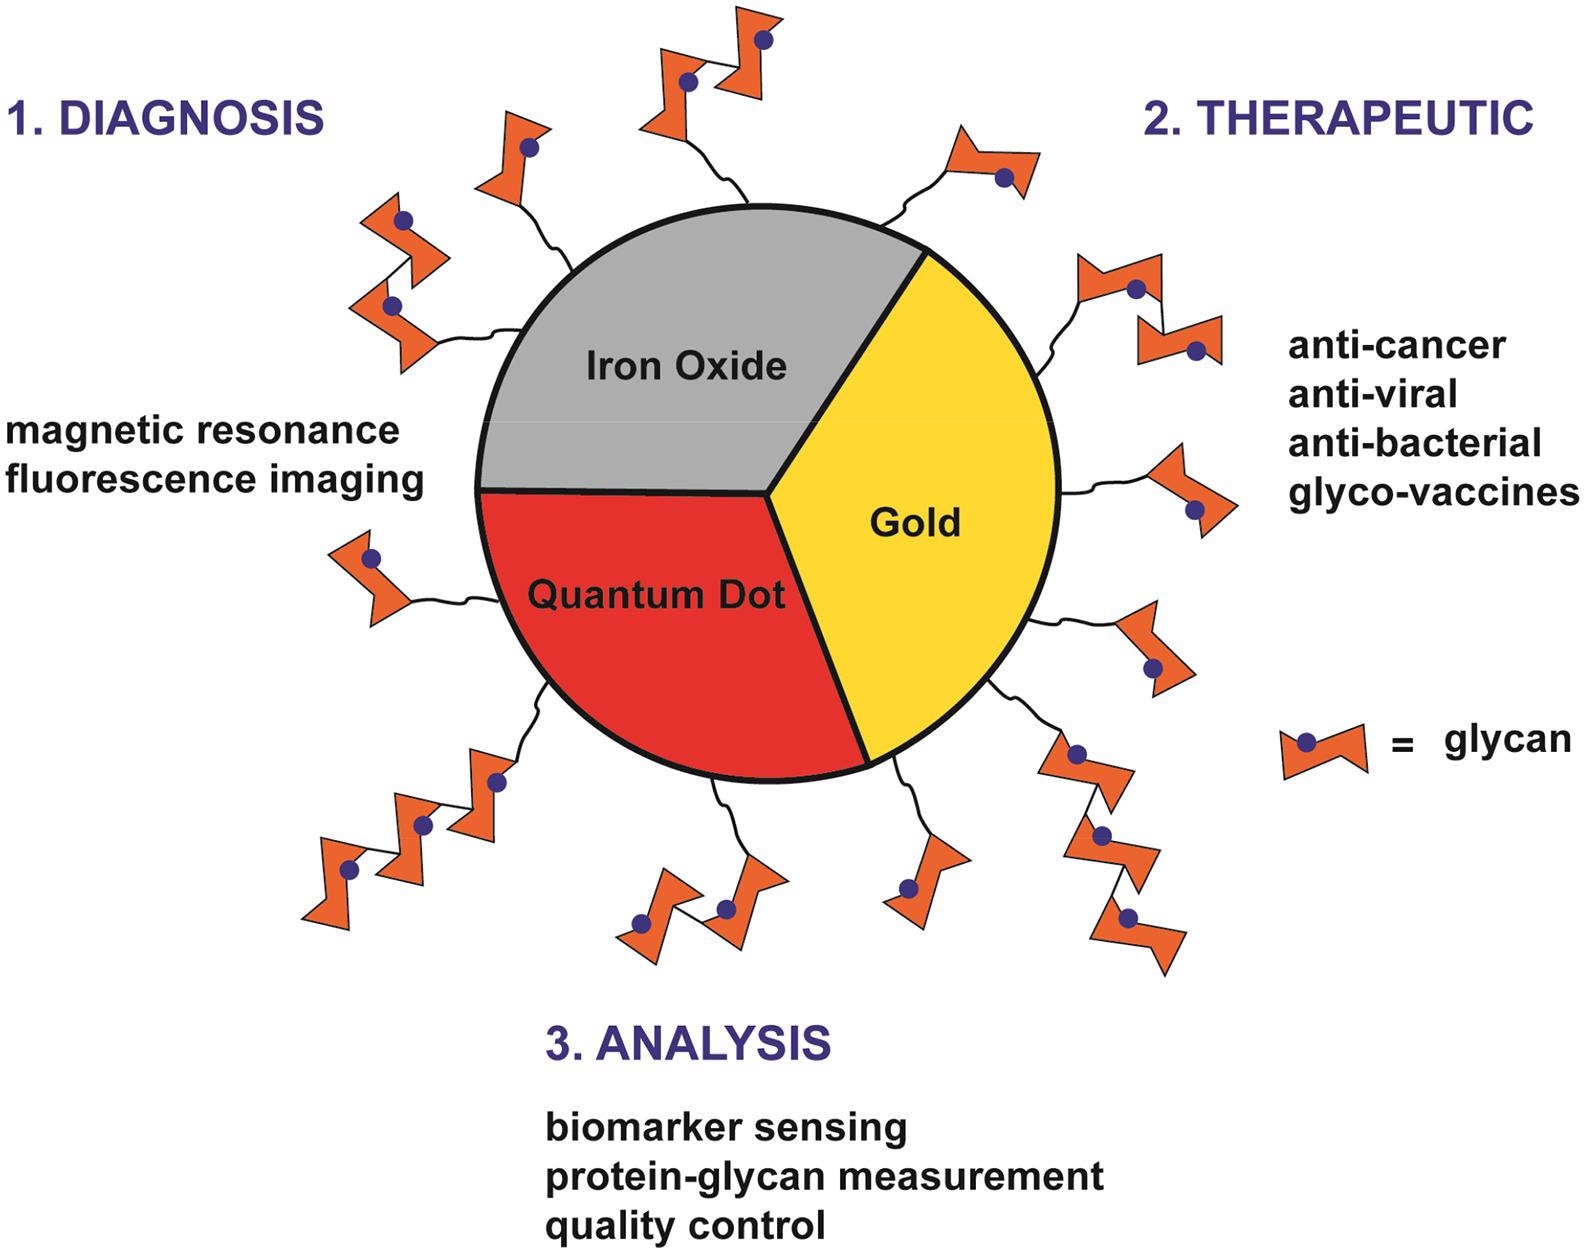 Three main applications of glyco-nanotechnology—1. Diagnosis, 2. Therapeutic, and 3. Analysis.